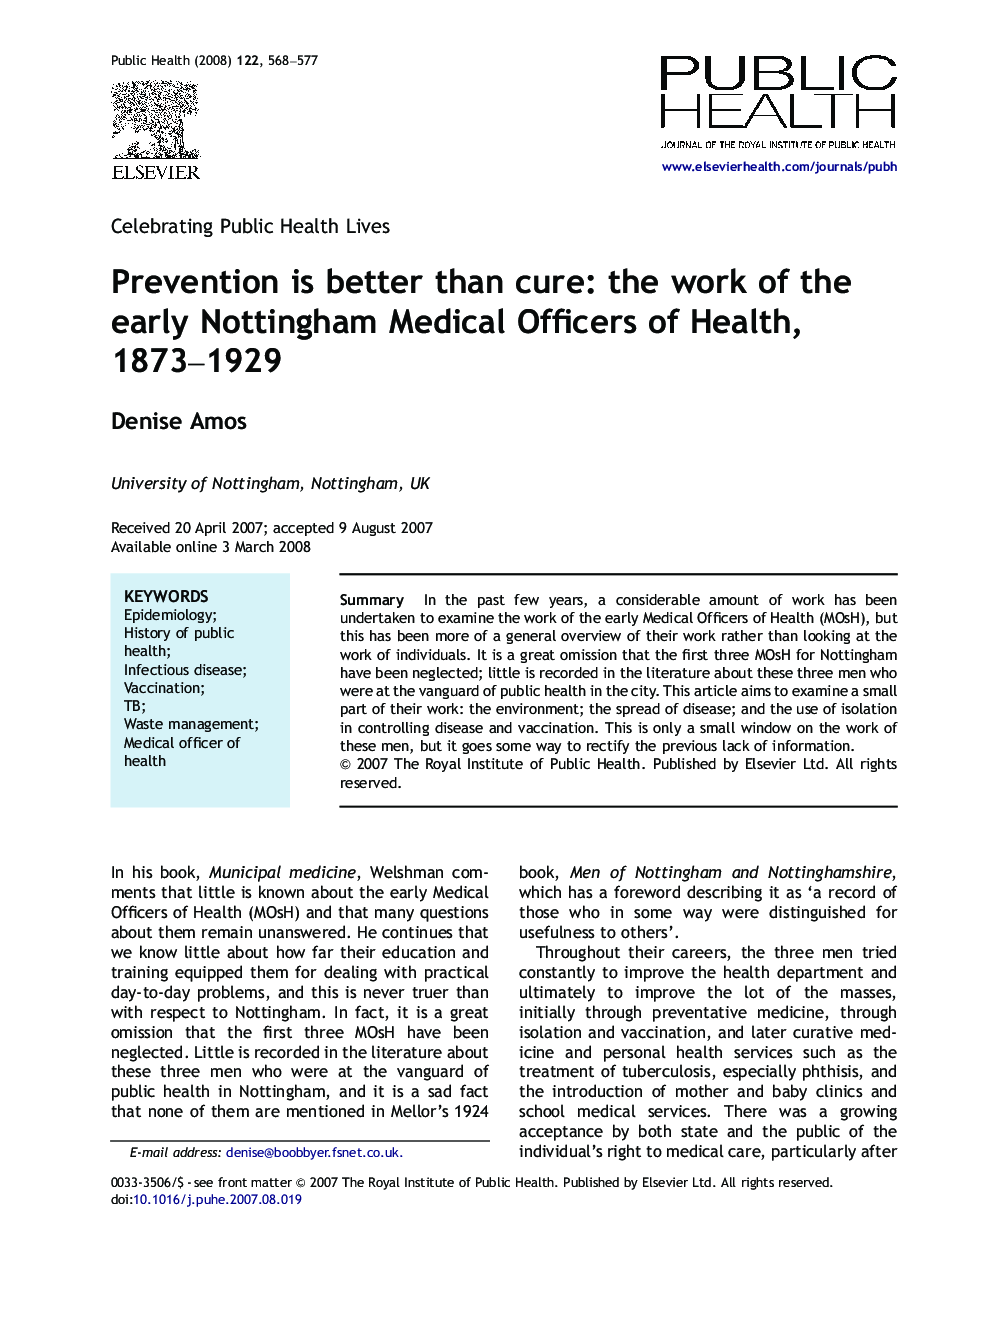 Prevention is better than cure: the work of the early Nottingham Medical Officers of Health, 1873-1929